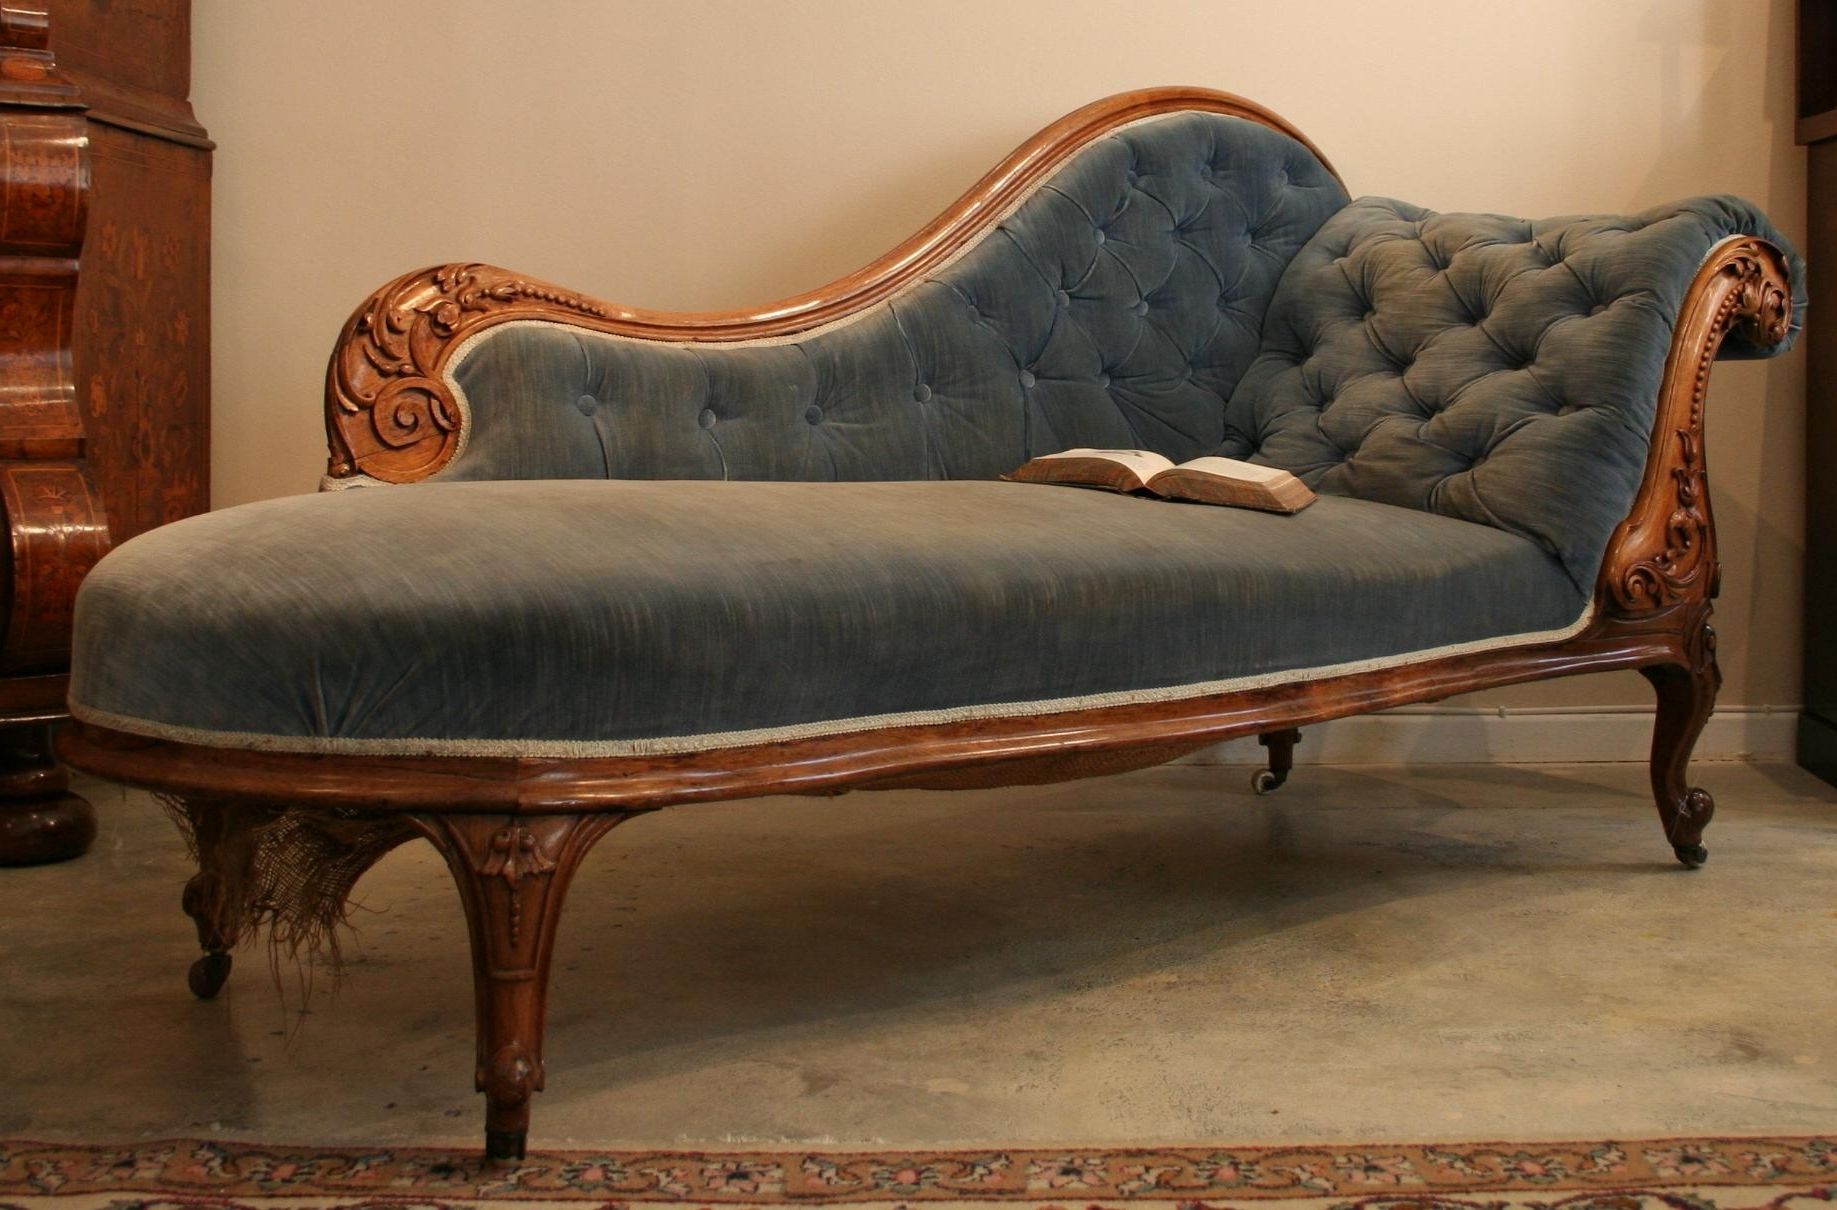 Victorian Chaise Lounge : Furniture Decor Trend – Contemporary Intended For Most Recent Victorian Chaise Lounges (View 15 of 15)